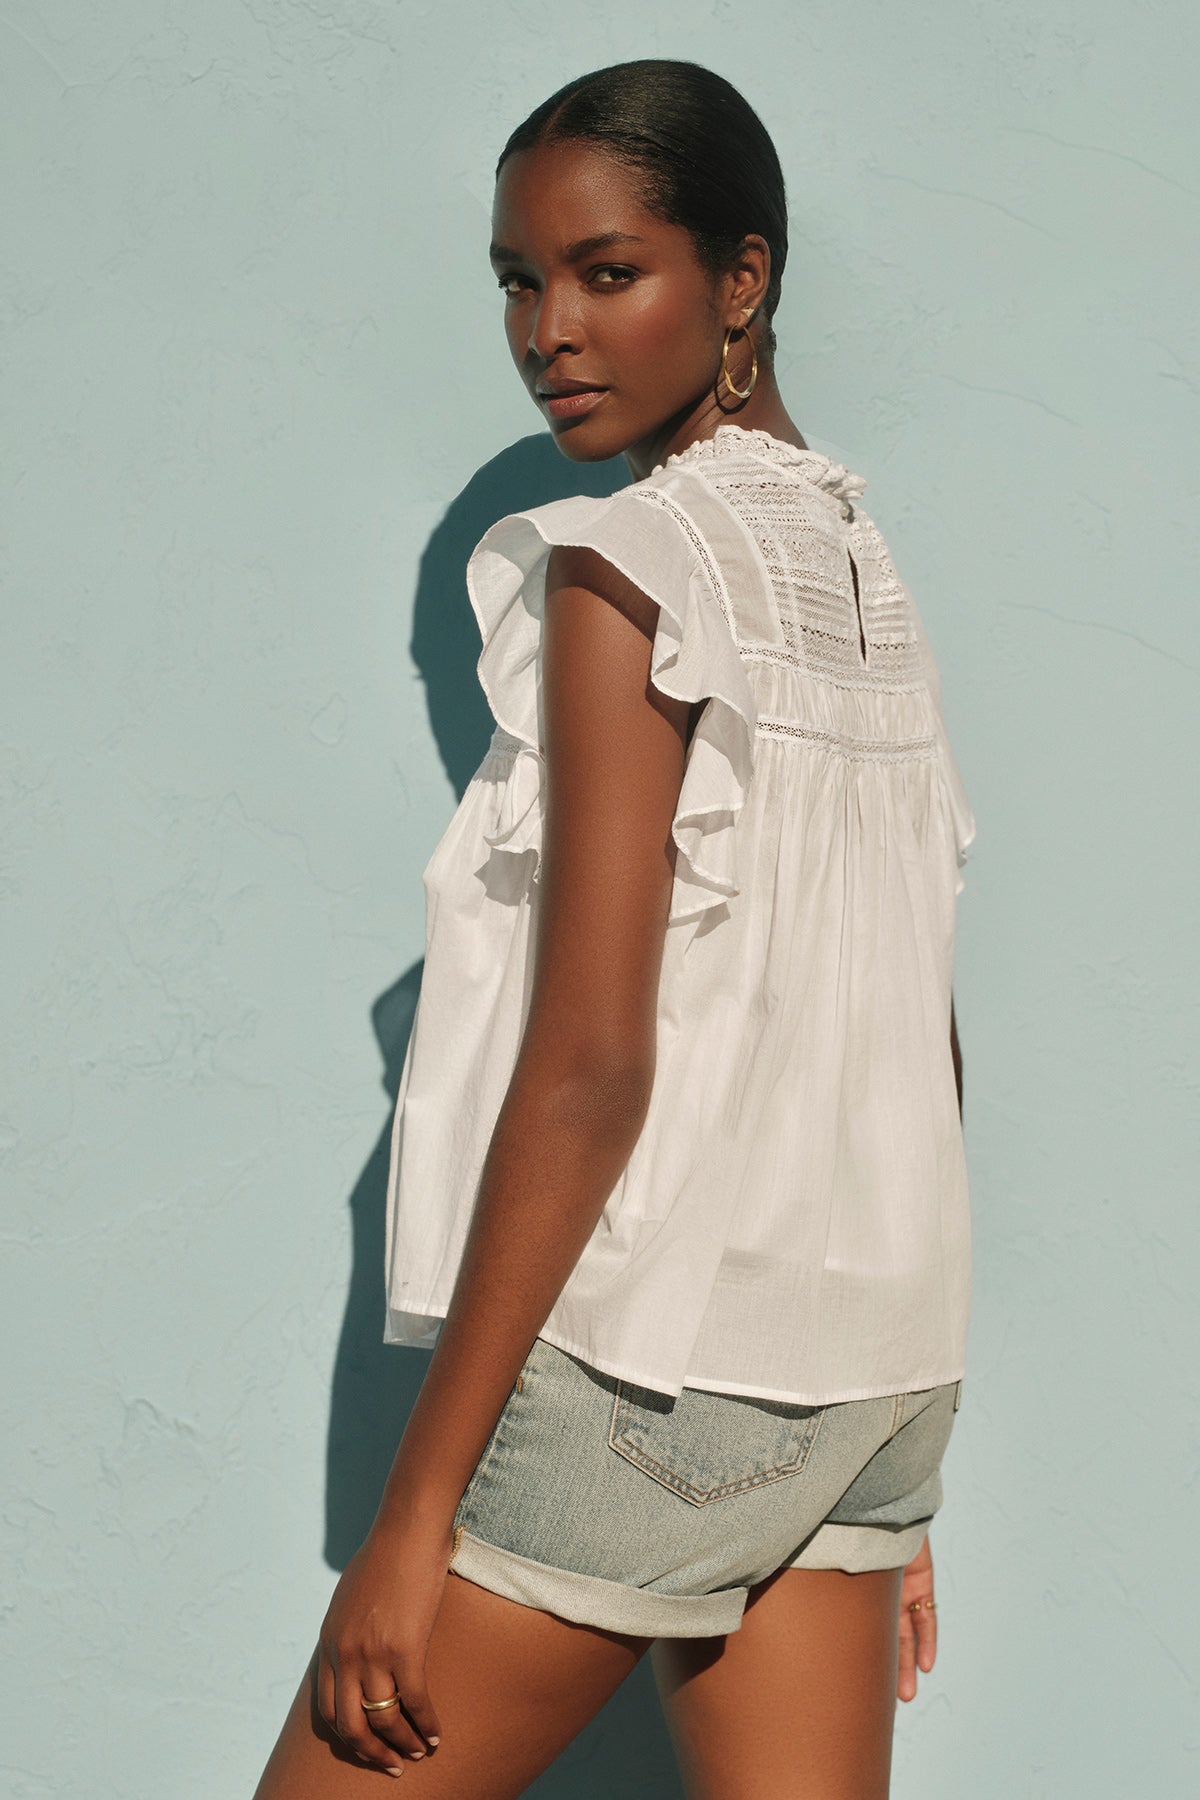   A person in the INESSA COTTON LACE TOP by Velvet by Graham & Spencer and denim shorts stands against a light blue textured wall, looking over their shoulder. 